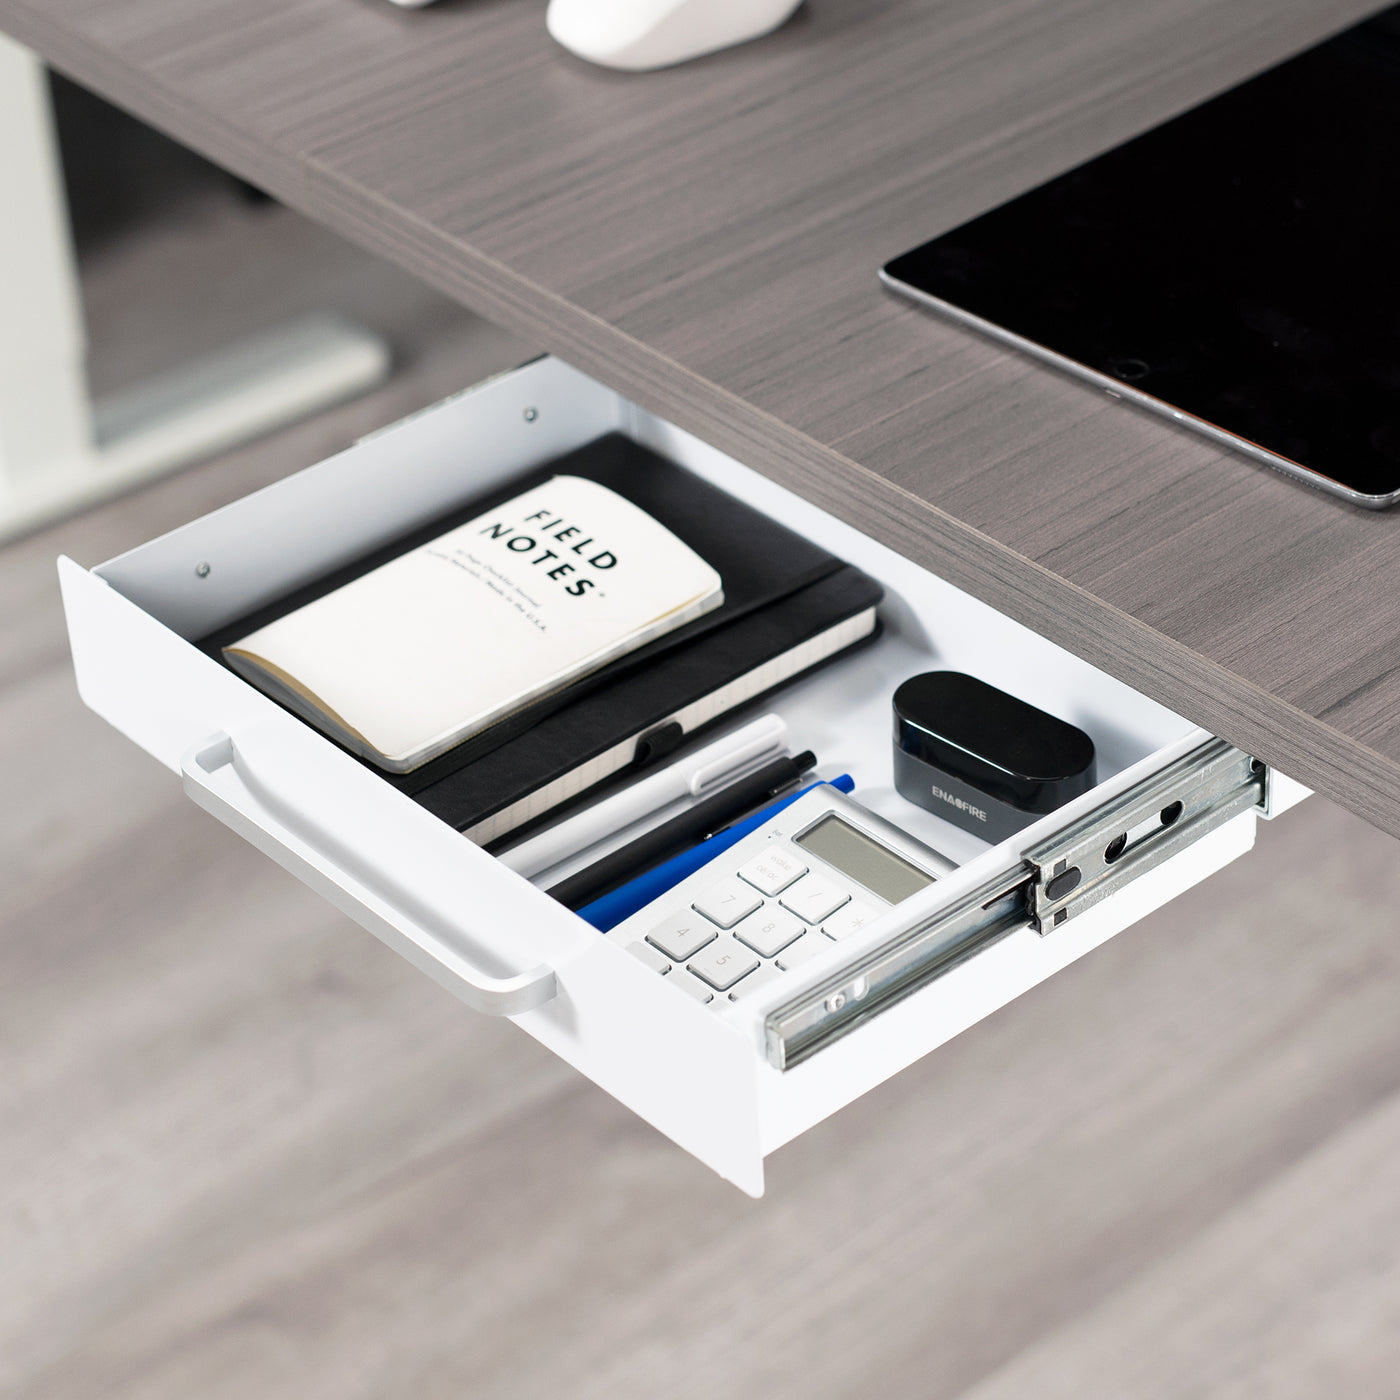 Low profile 13 inch under desk drawer with pull handle for convenient storage and organization.